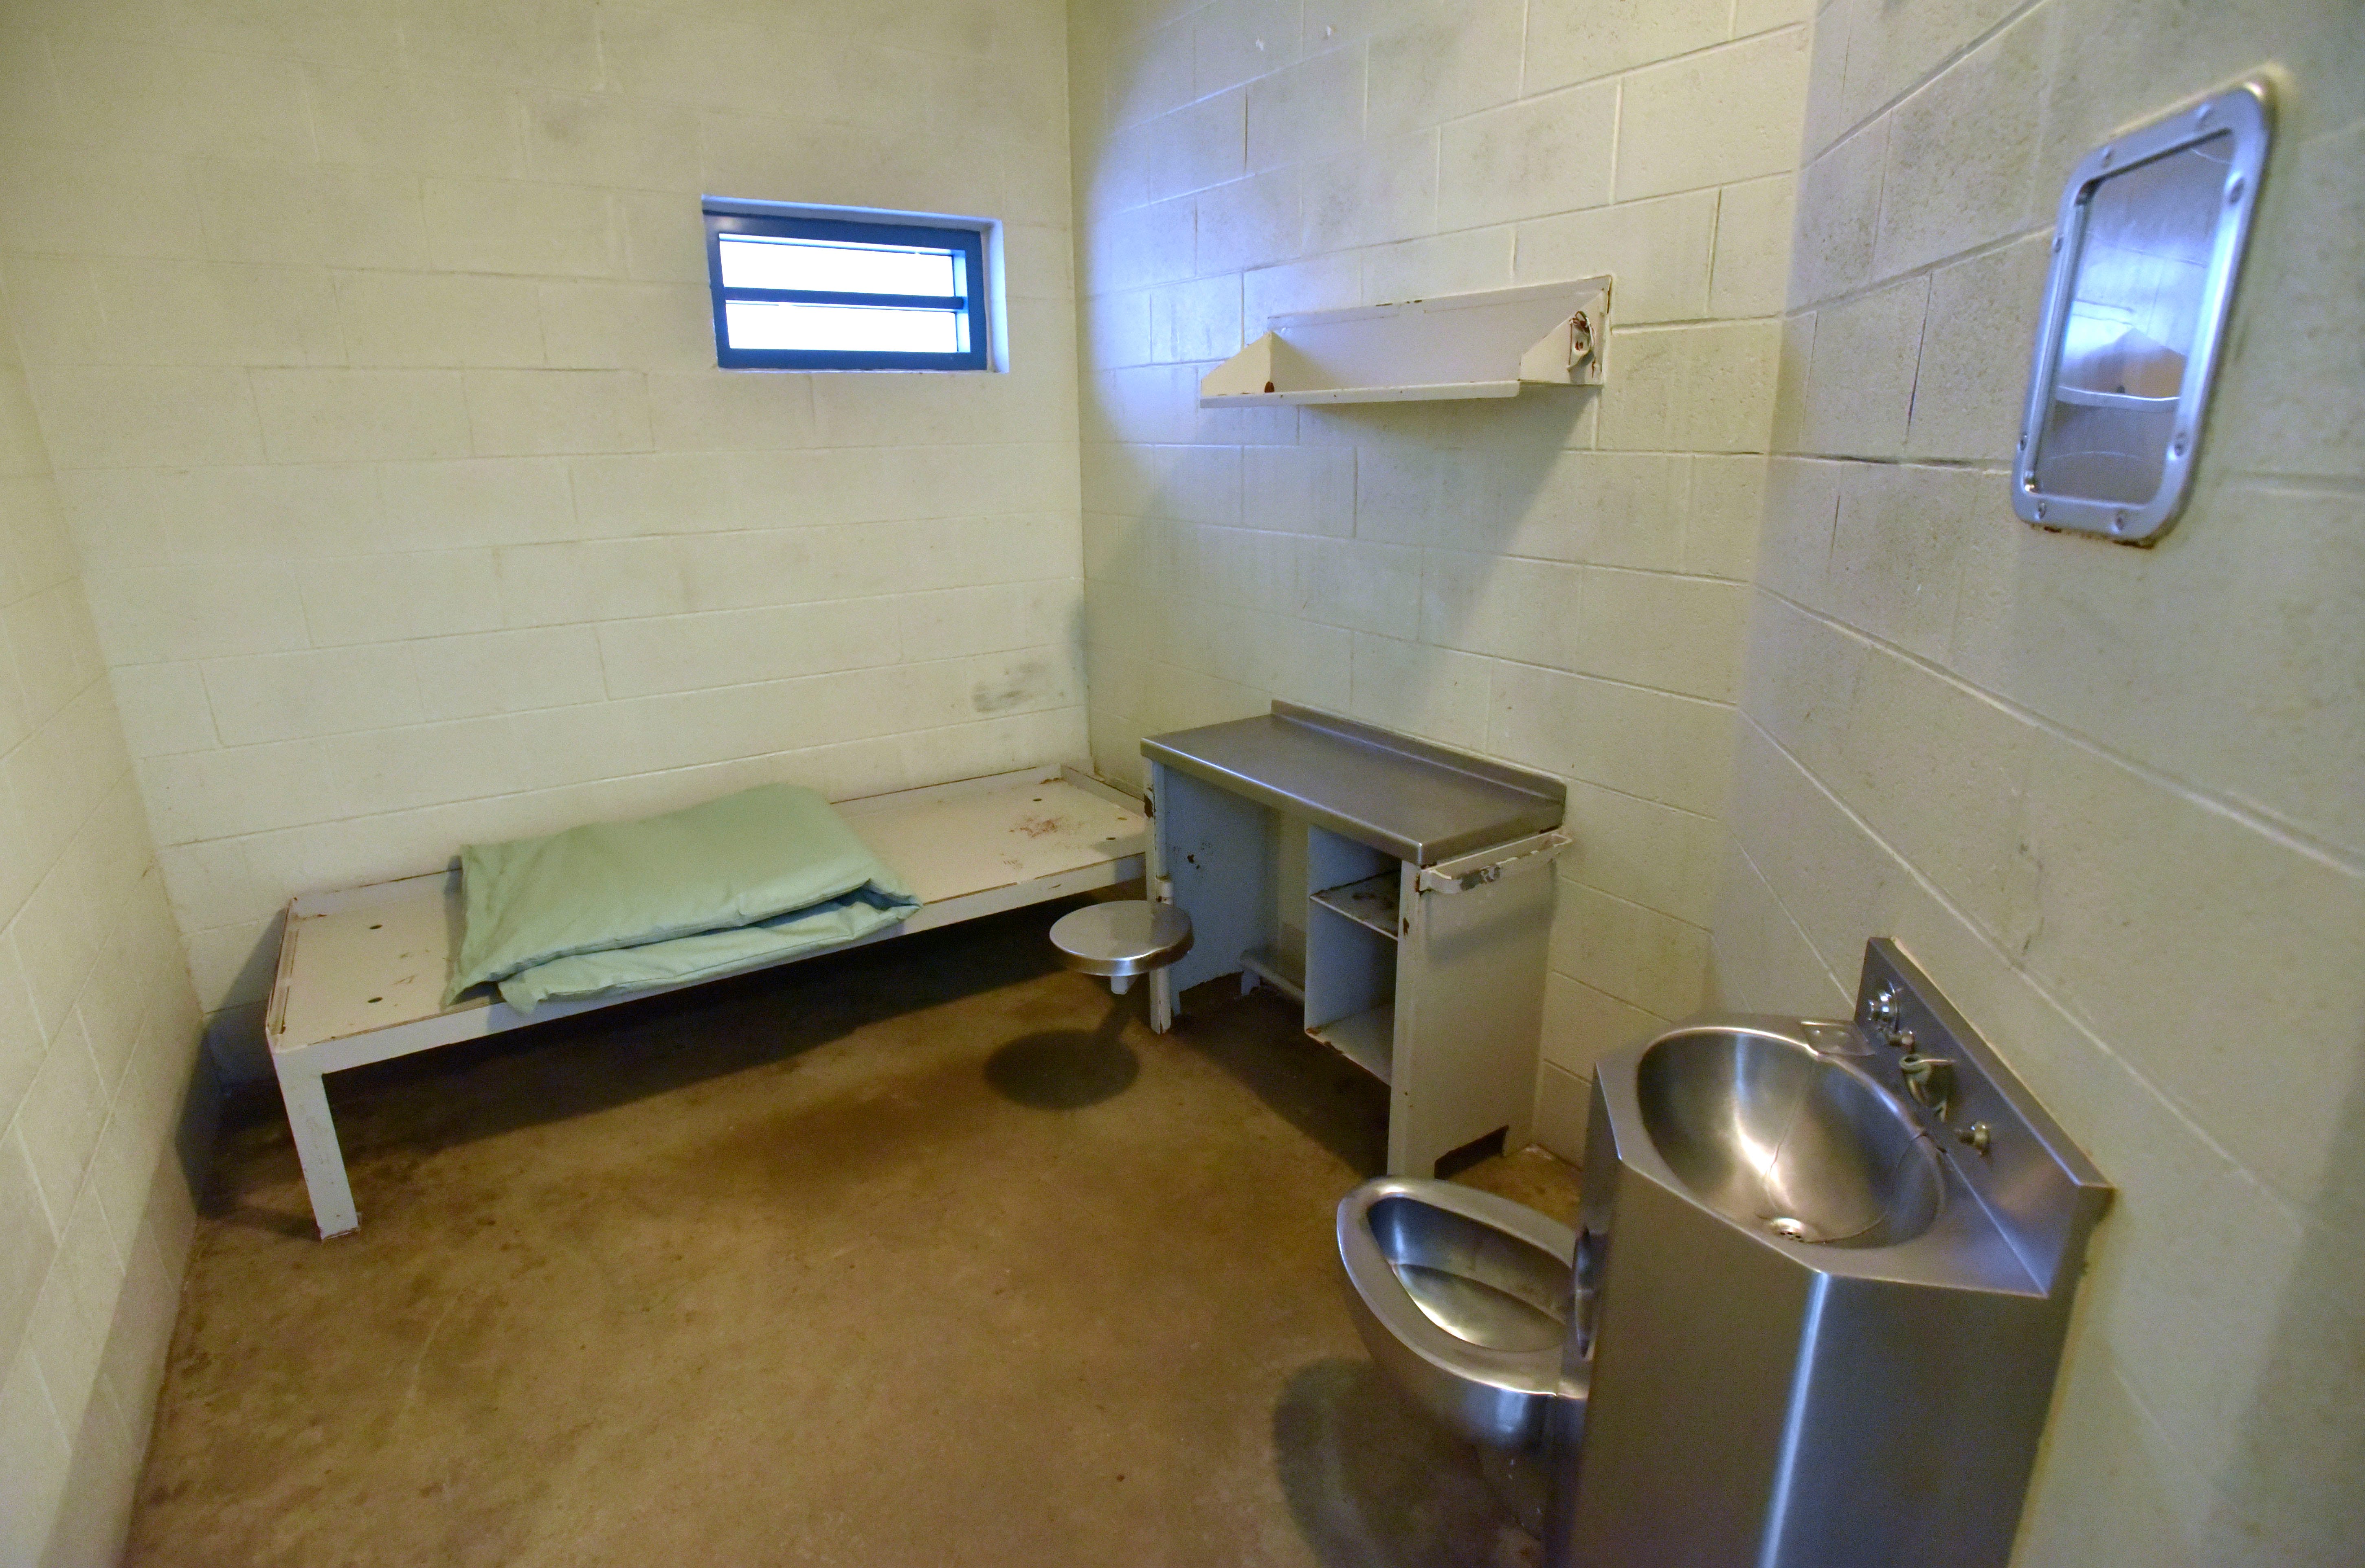 The interior of a typical jail cell.